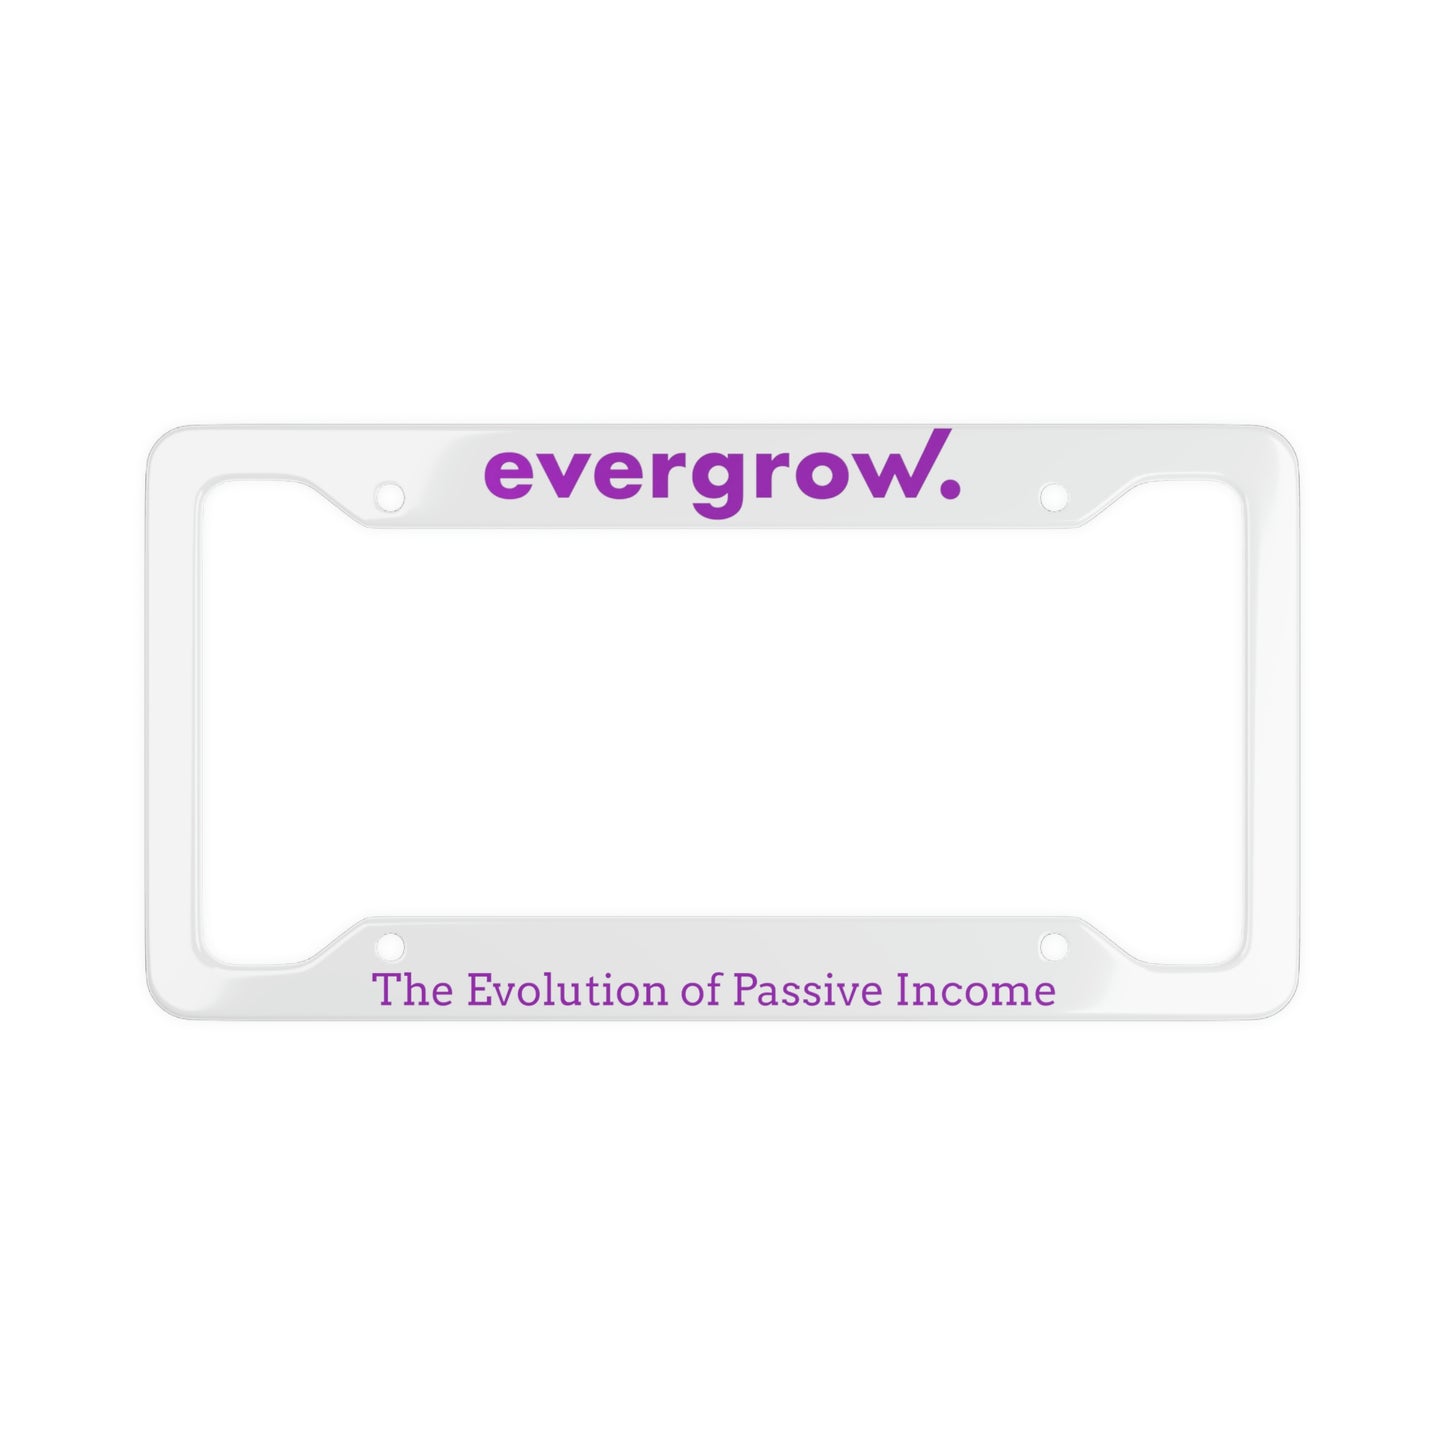 China - License Plate Frame - evergrow on top - The Evolution of Passive Income on bottom